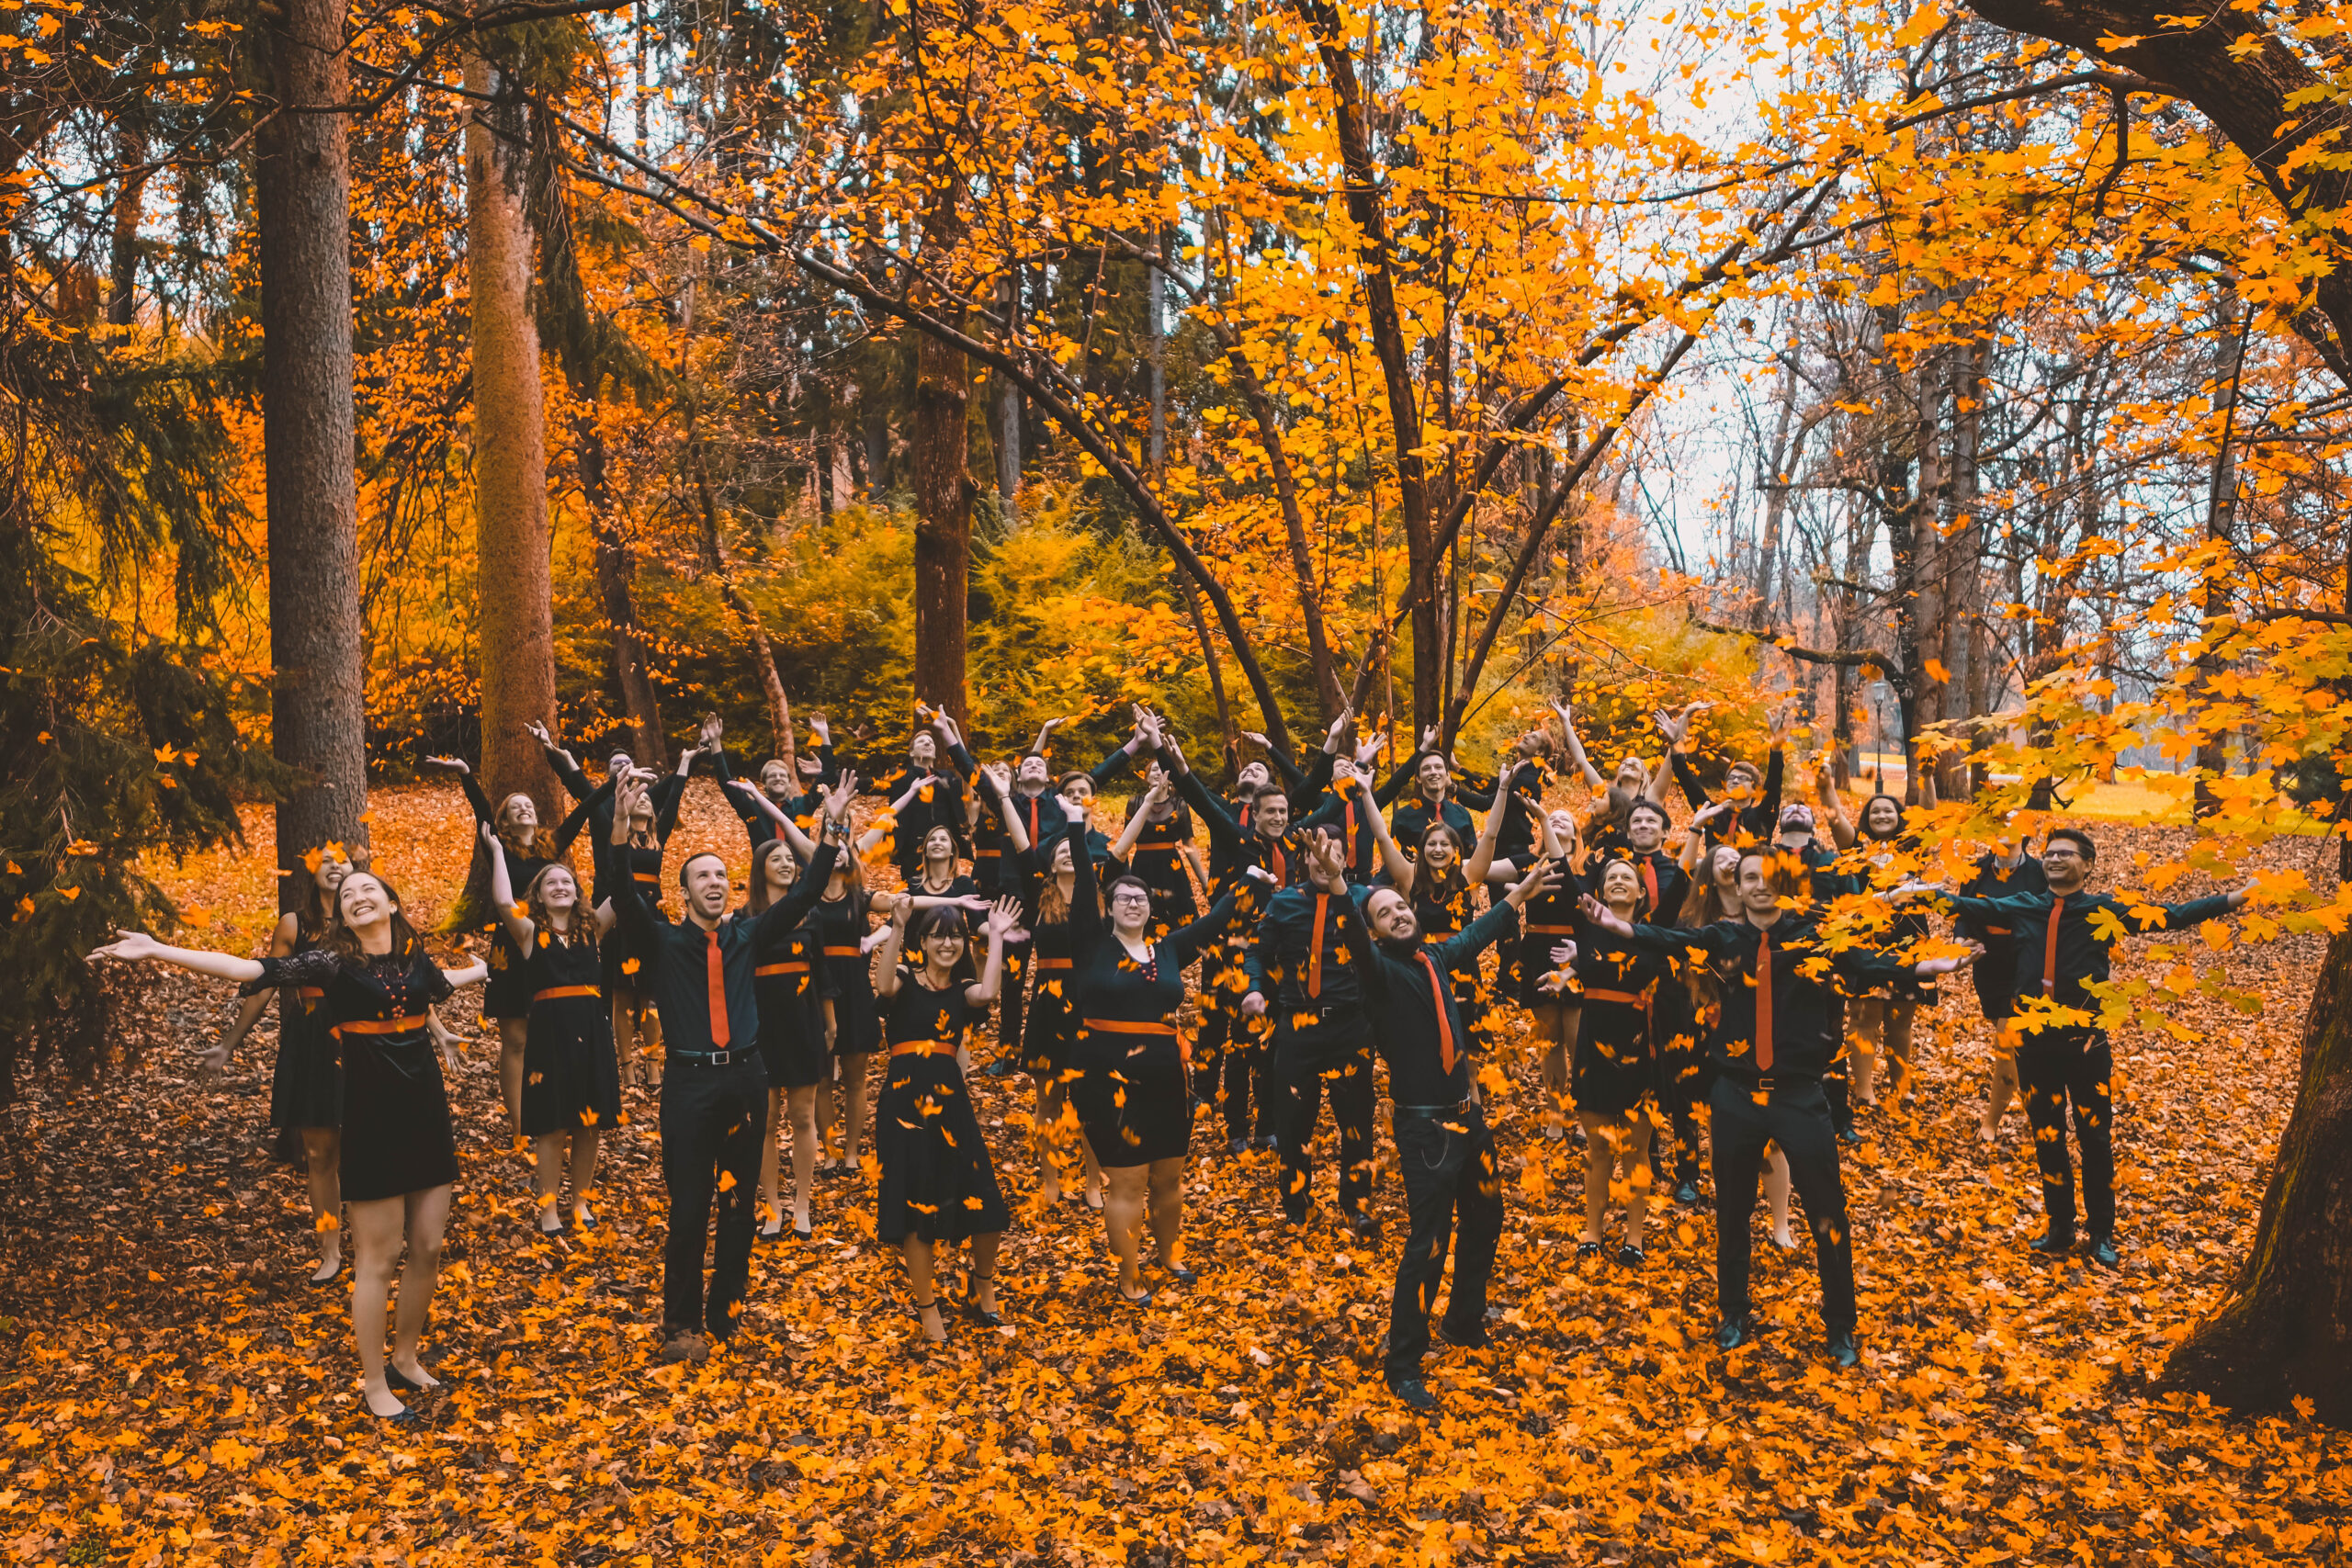 Žan Križnar, Slovenia: 50 Shades of Orange, 2018, Crescendo Mixed Choir, Slovenia - According to the members of the choir, this is one of their favourite pictures and it was actually taken in Tivoli Park, only a stone’s throw away from where you are standing right now.